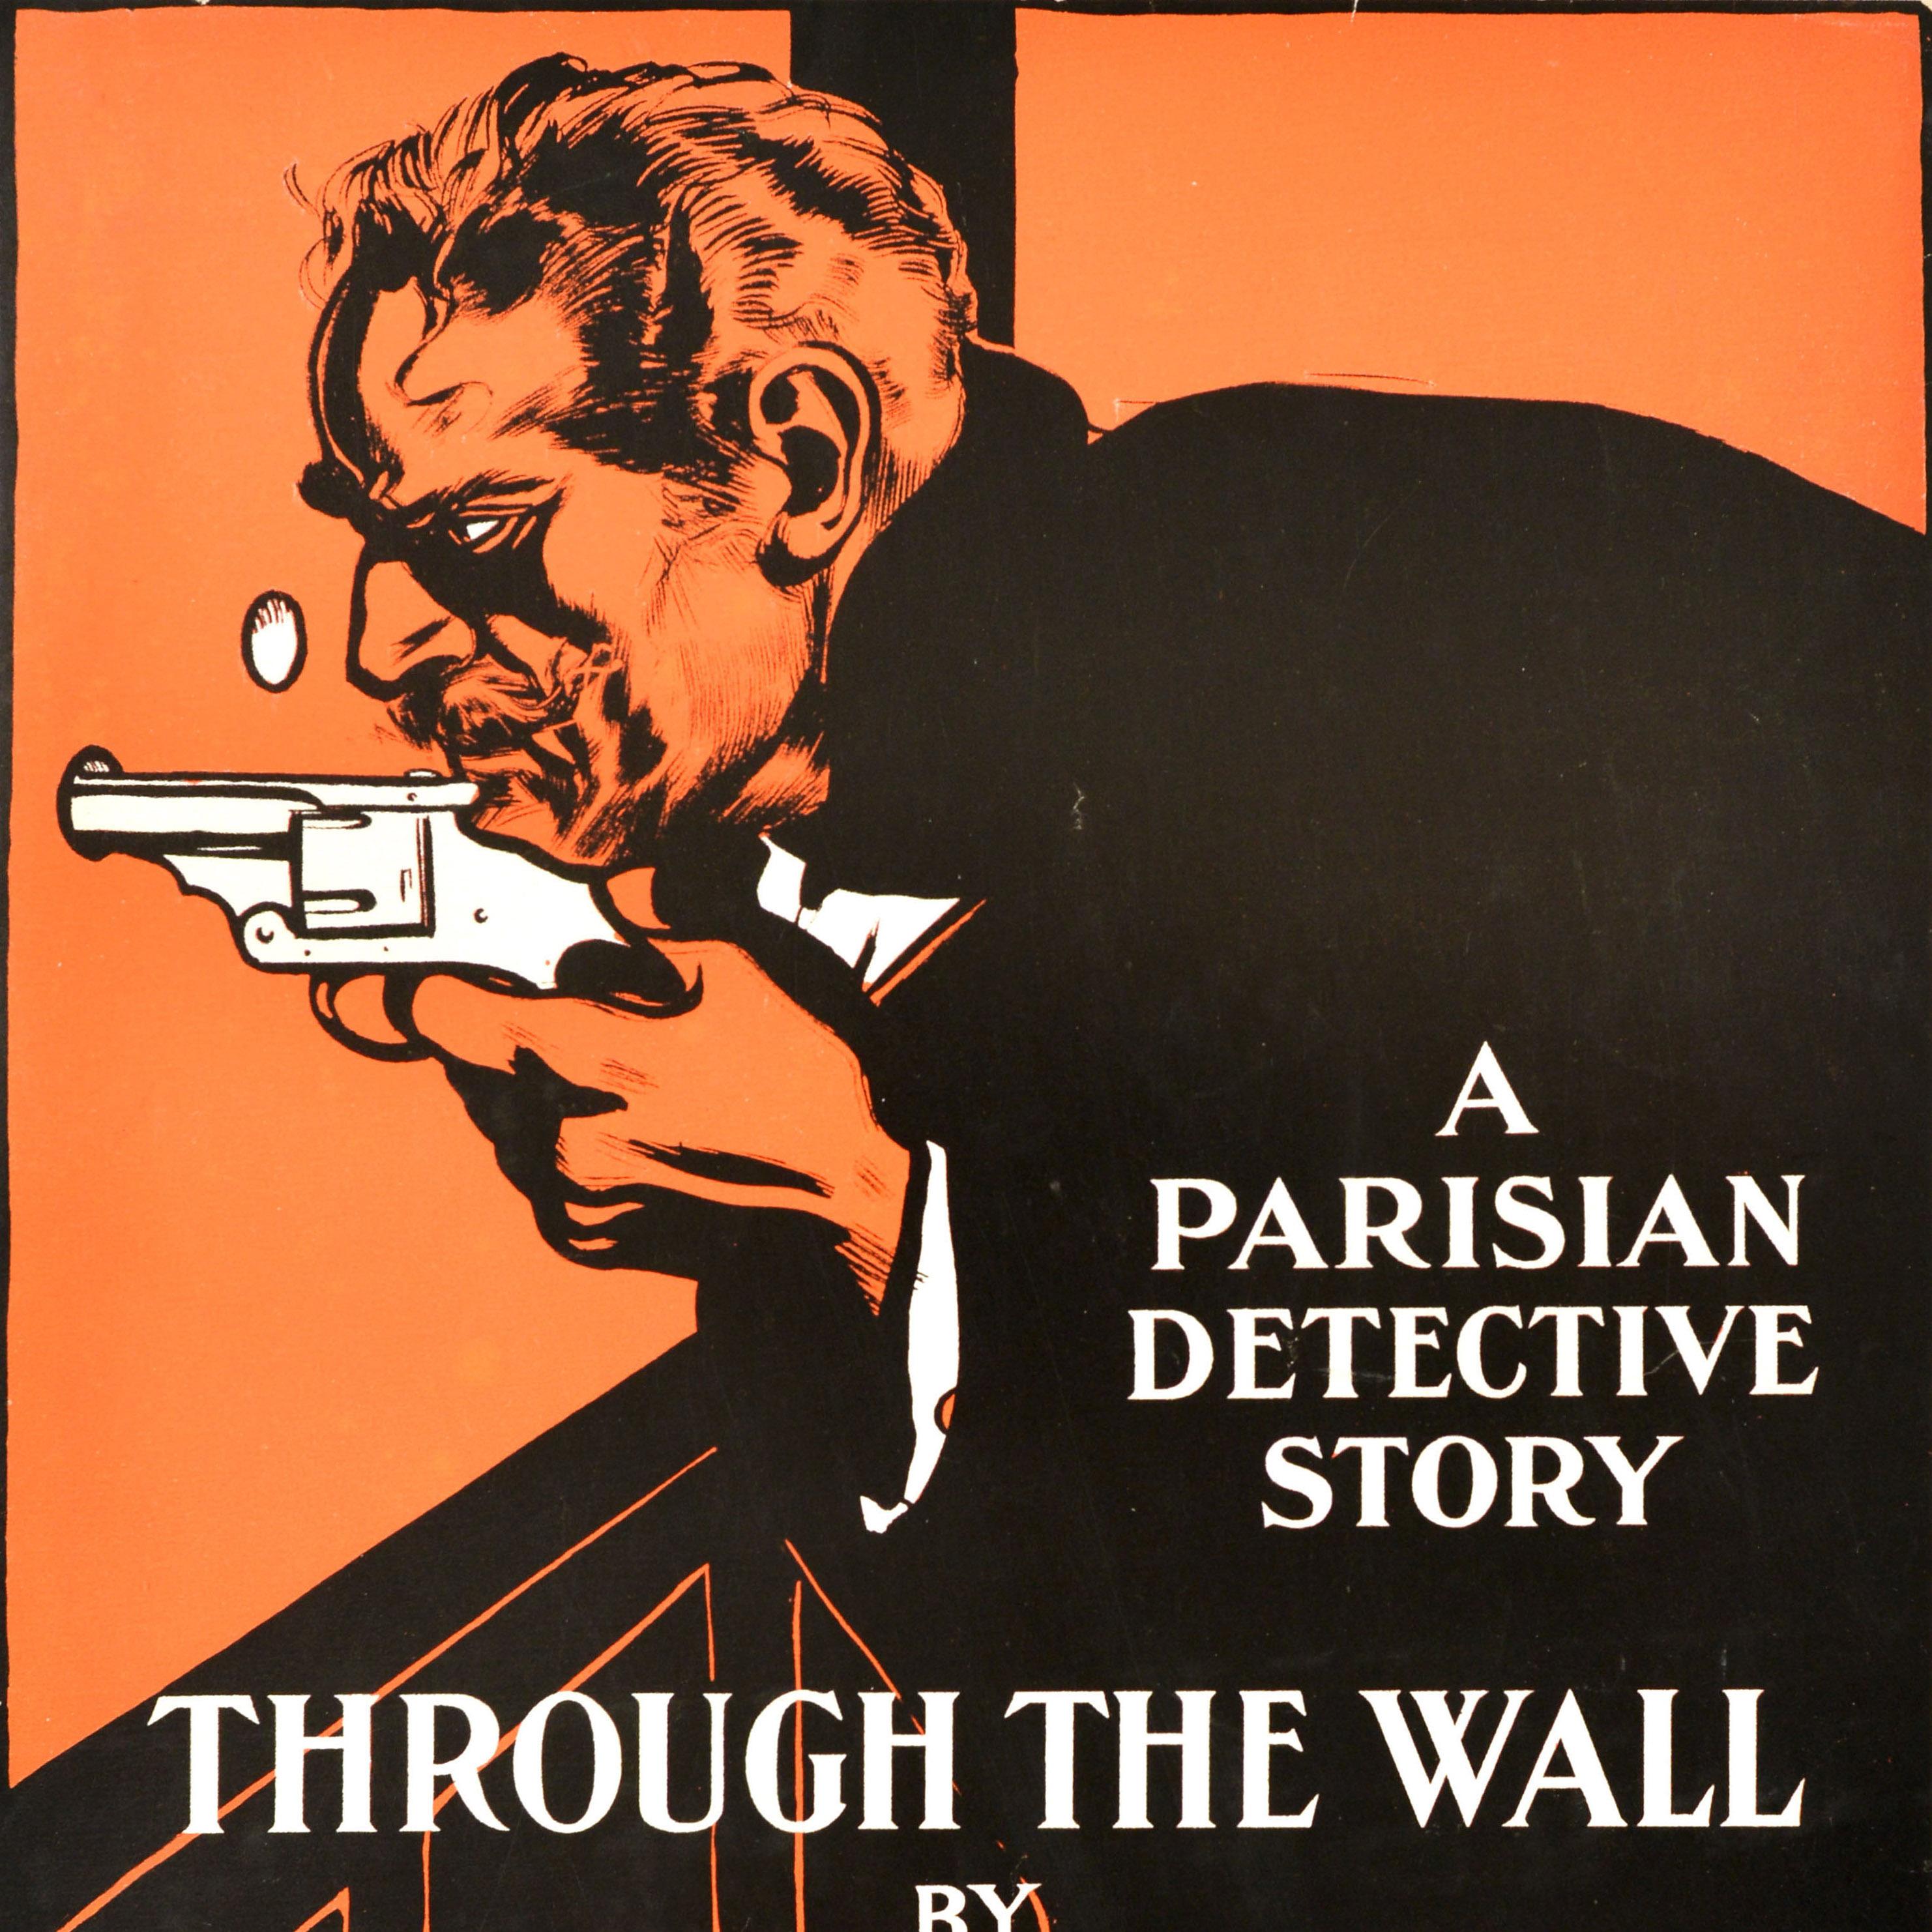 Original antique book advertising poster for a Parisian detective story Through the Wall by Cleveland Moffett published by D Appleton & Co featuring a great illustration of a moustached man holding a revolver gun through a hole in wall and peeping